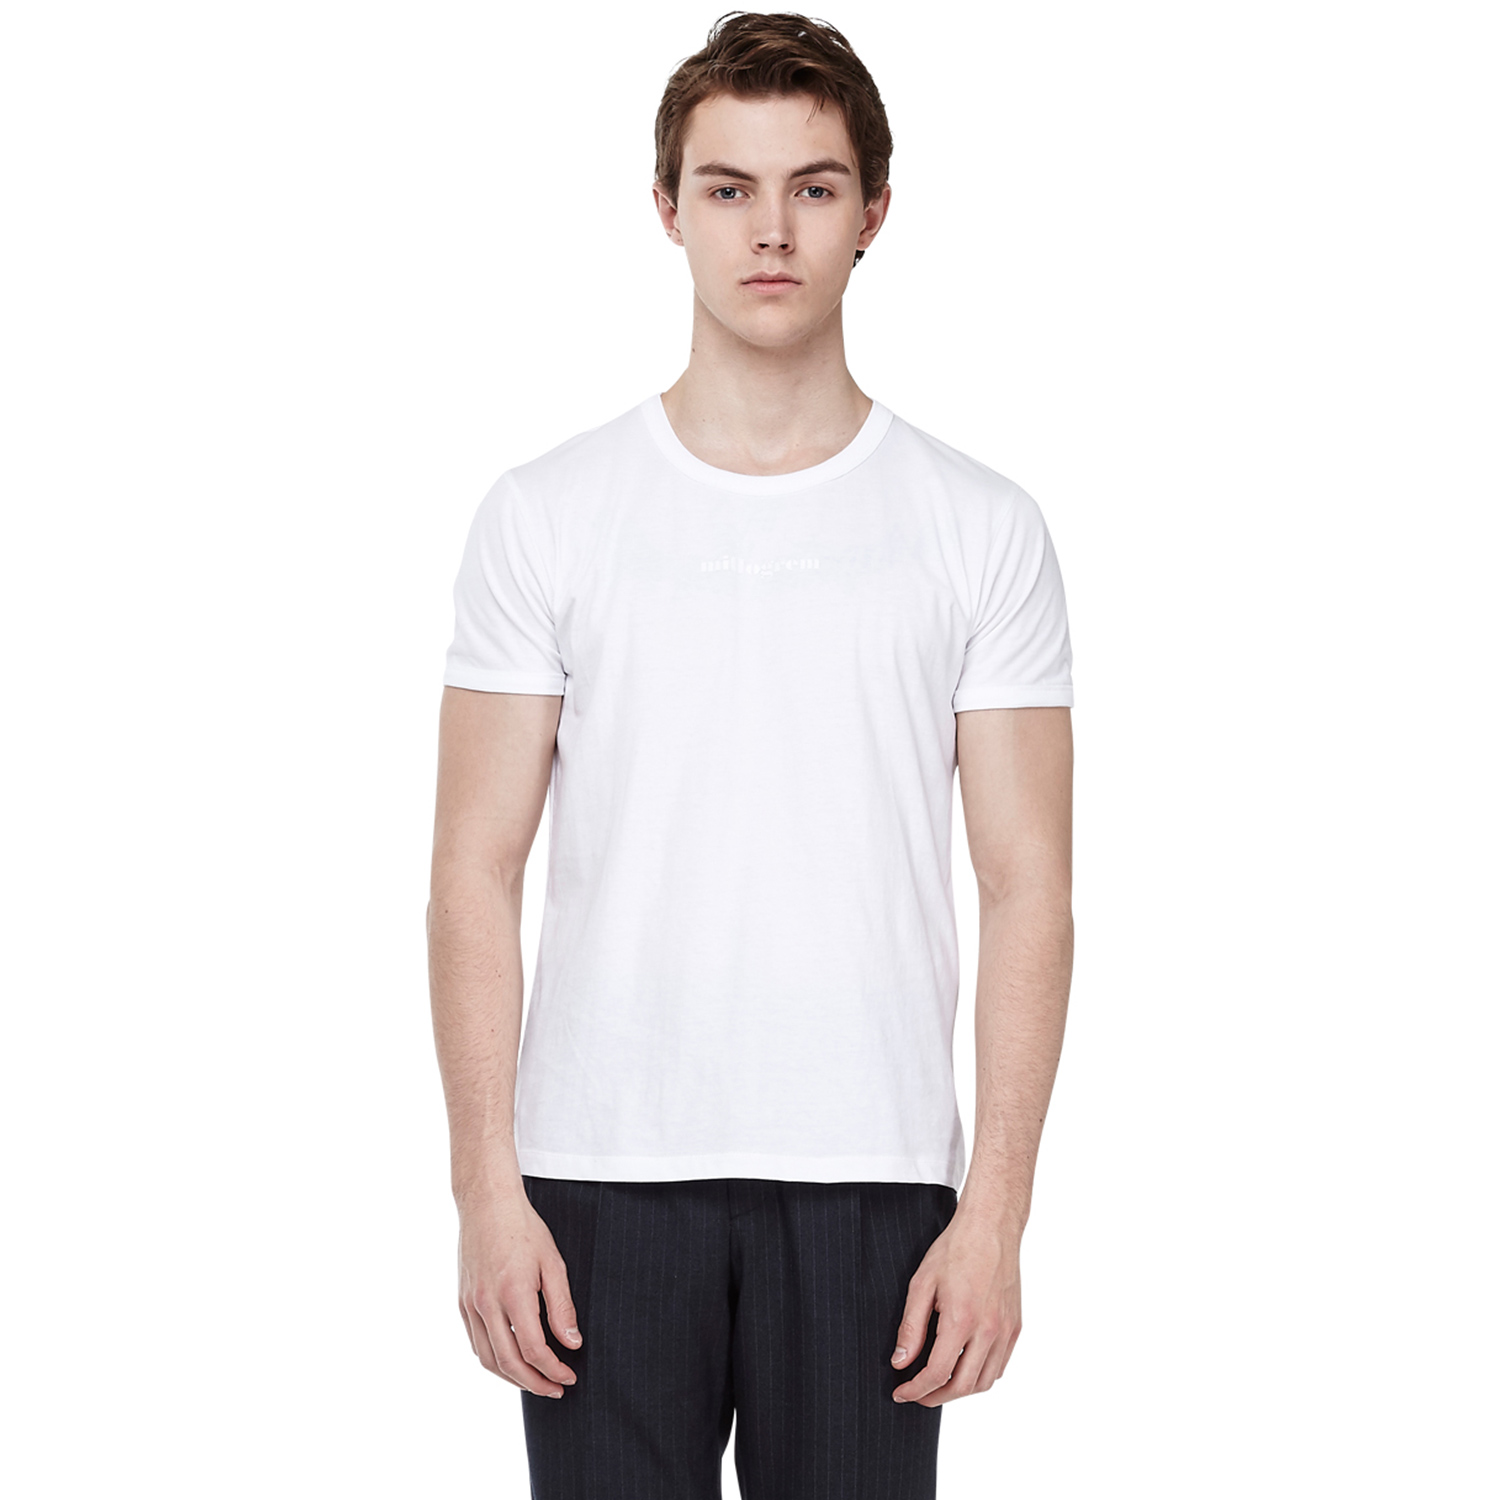 Guy fit t-shirts - White